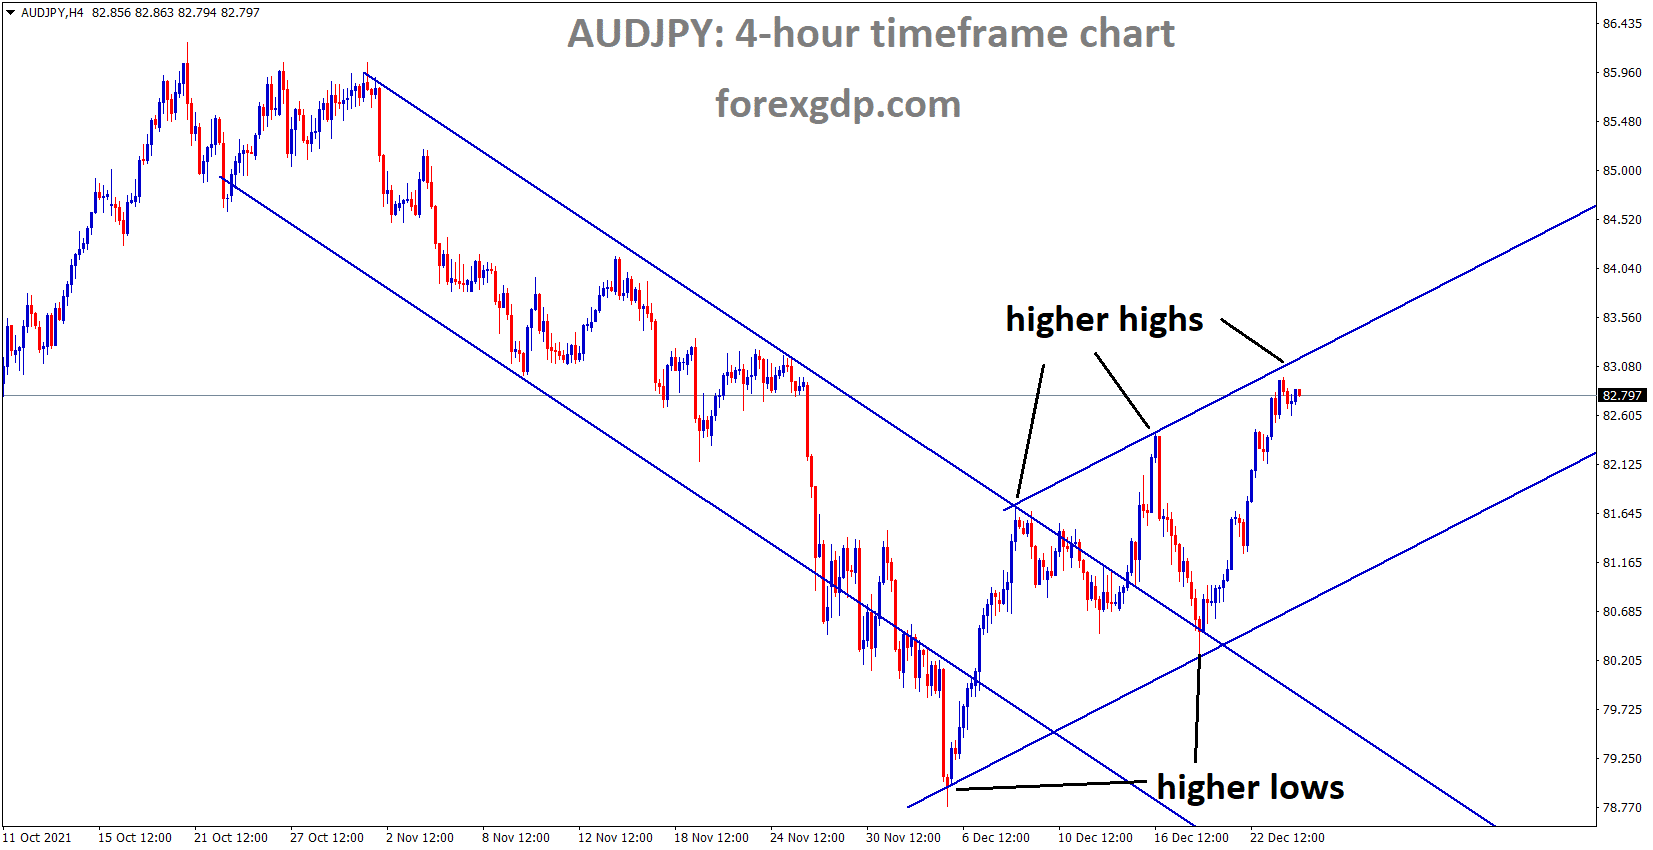 AUDJPY is moving in an Ascending channel and the market has reached the higher high area of the channel